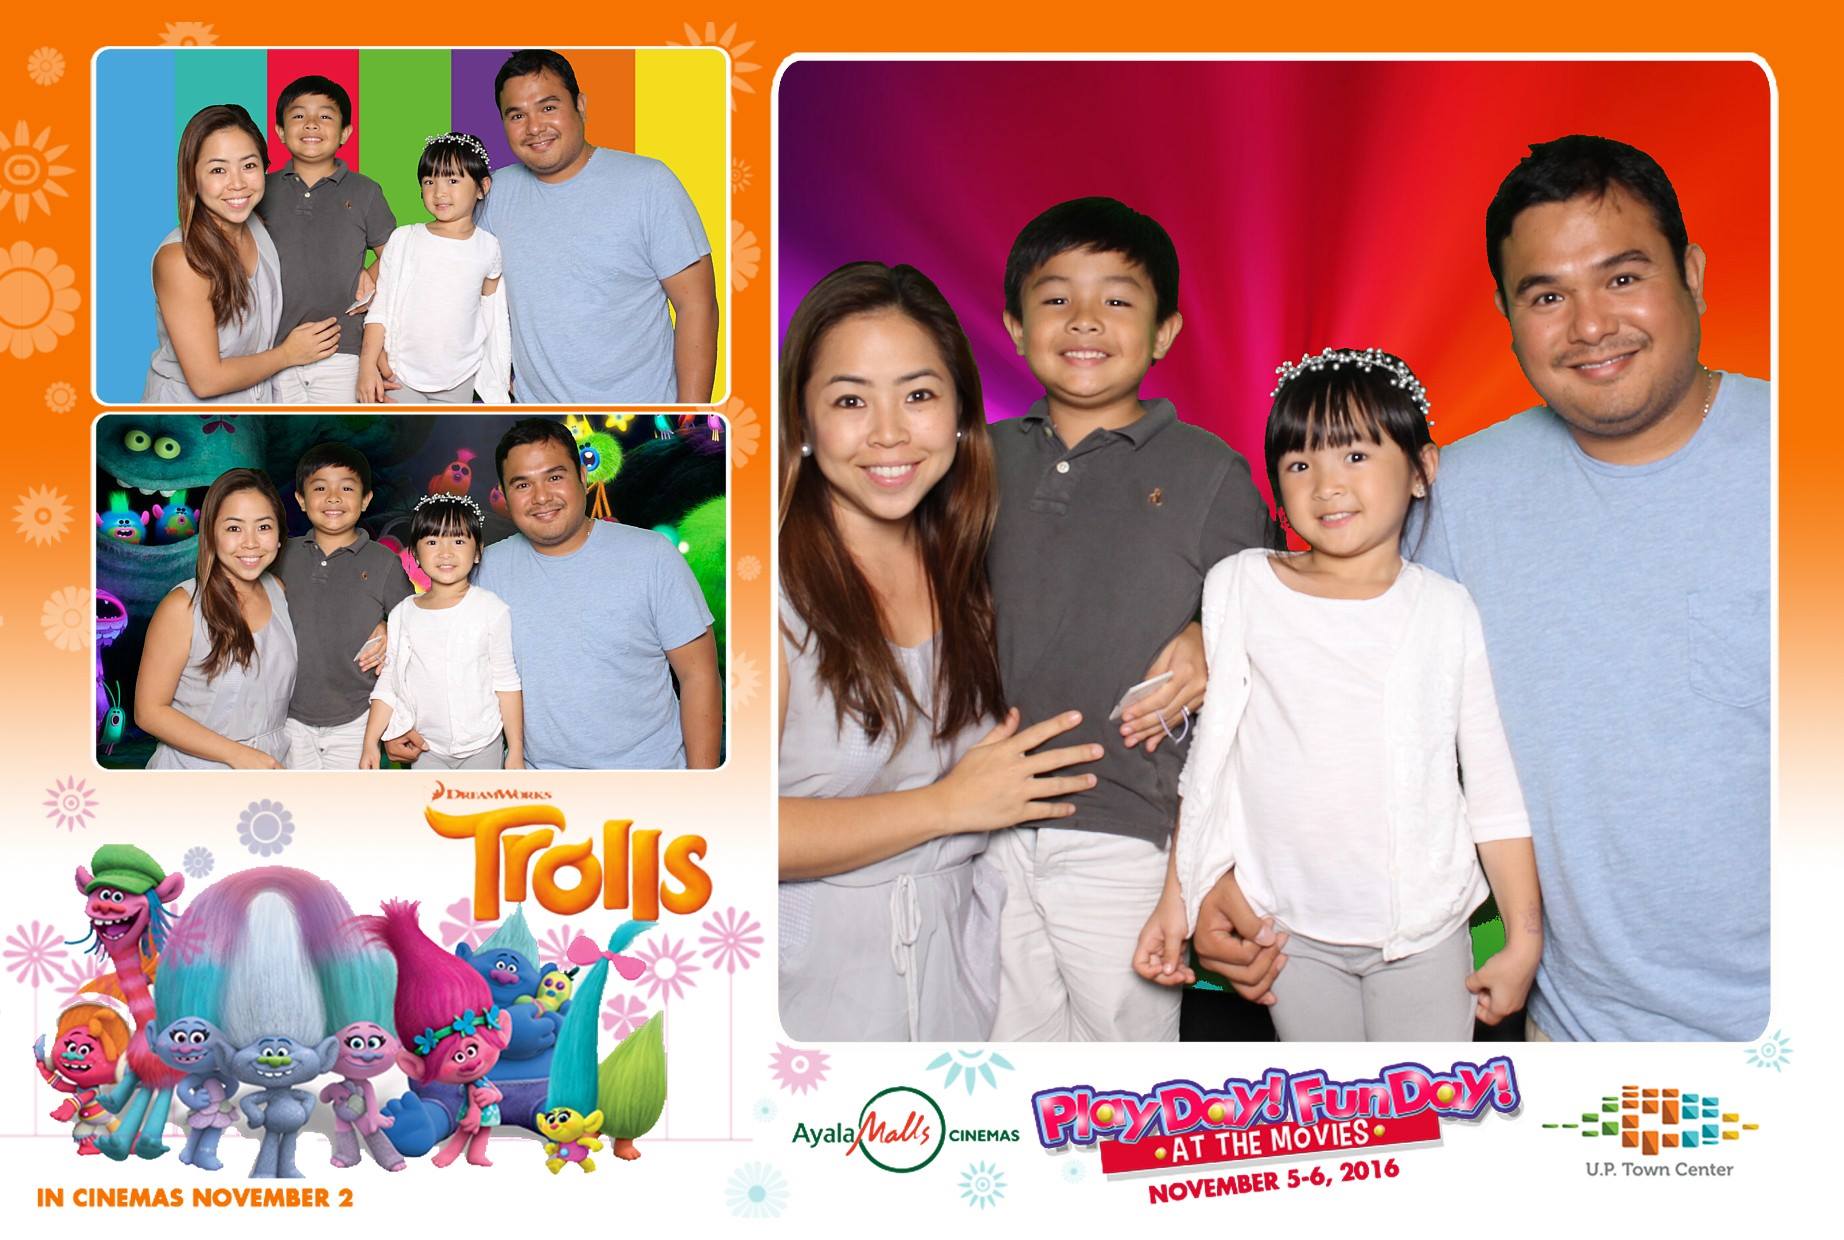 Play Day Fun Day @ UP Town Center Cinema with Trolls